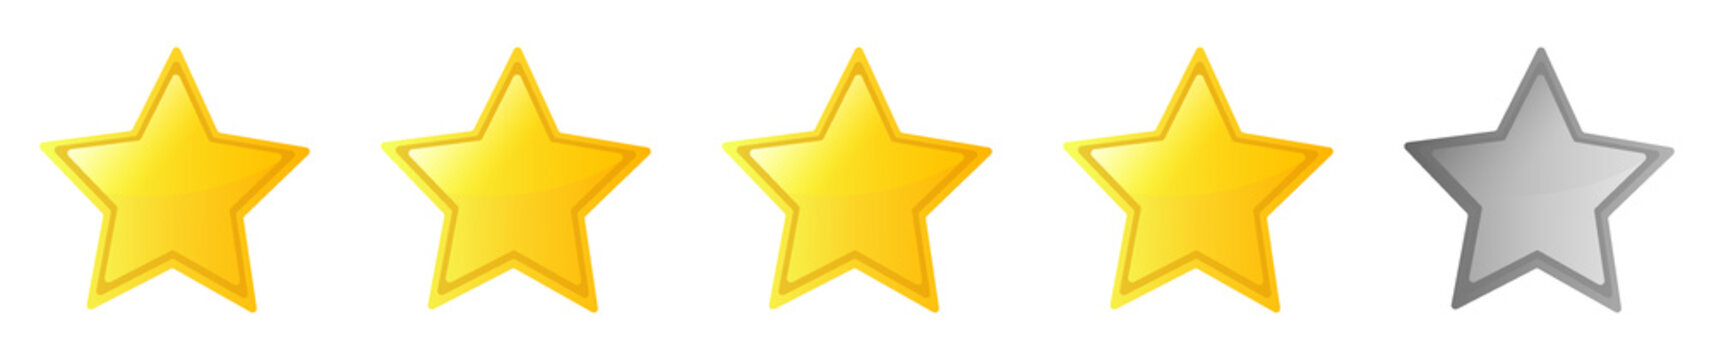 Five star gold icon with isolated background